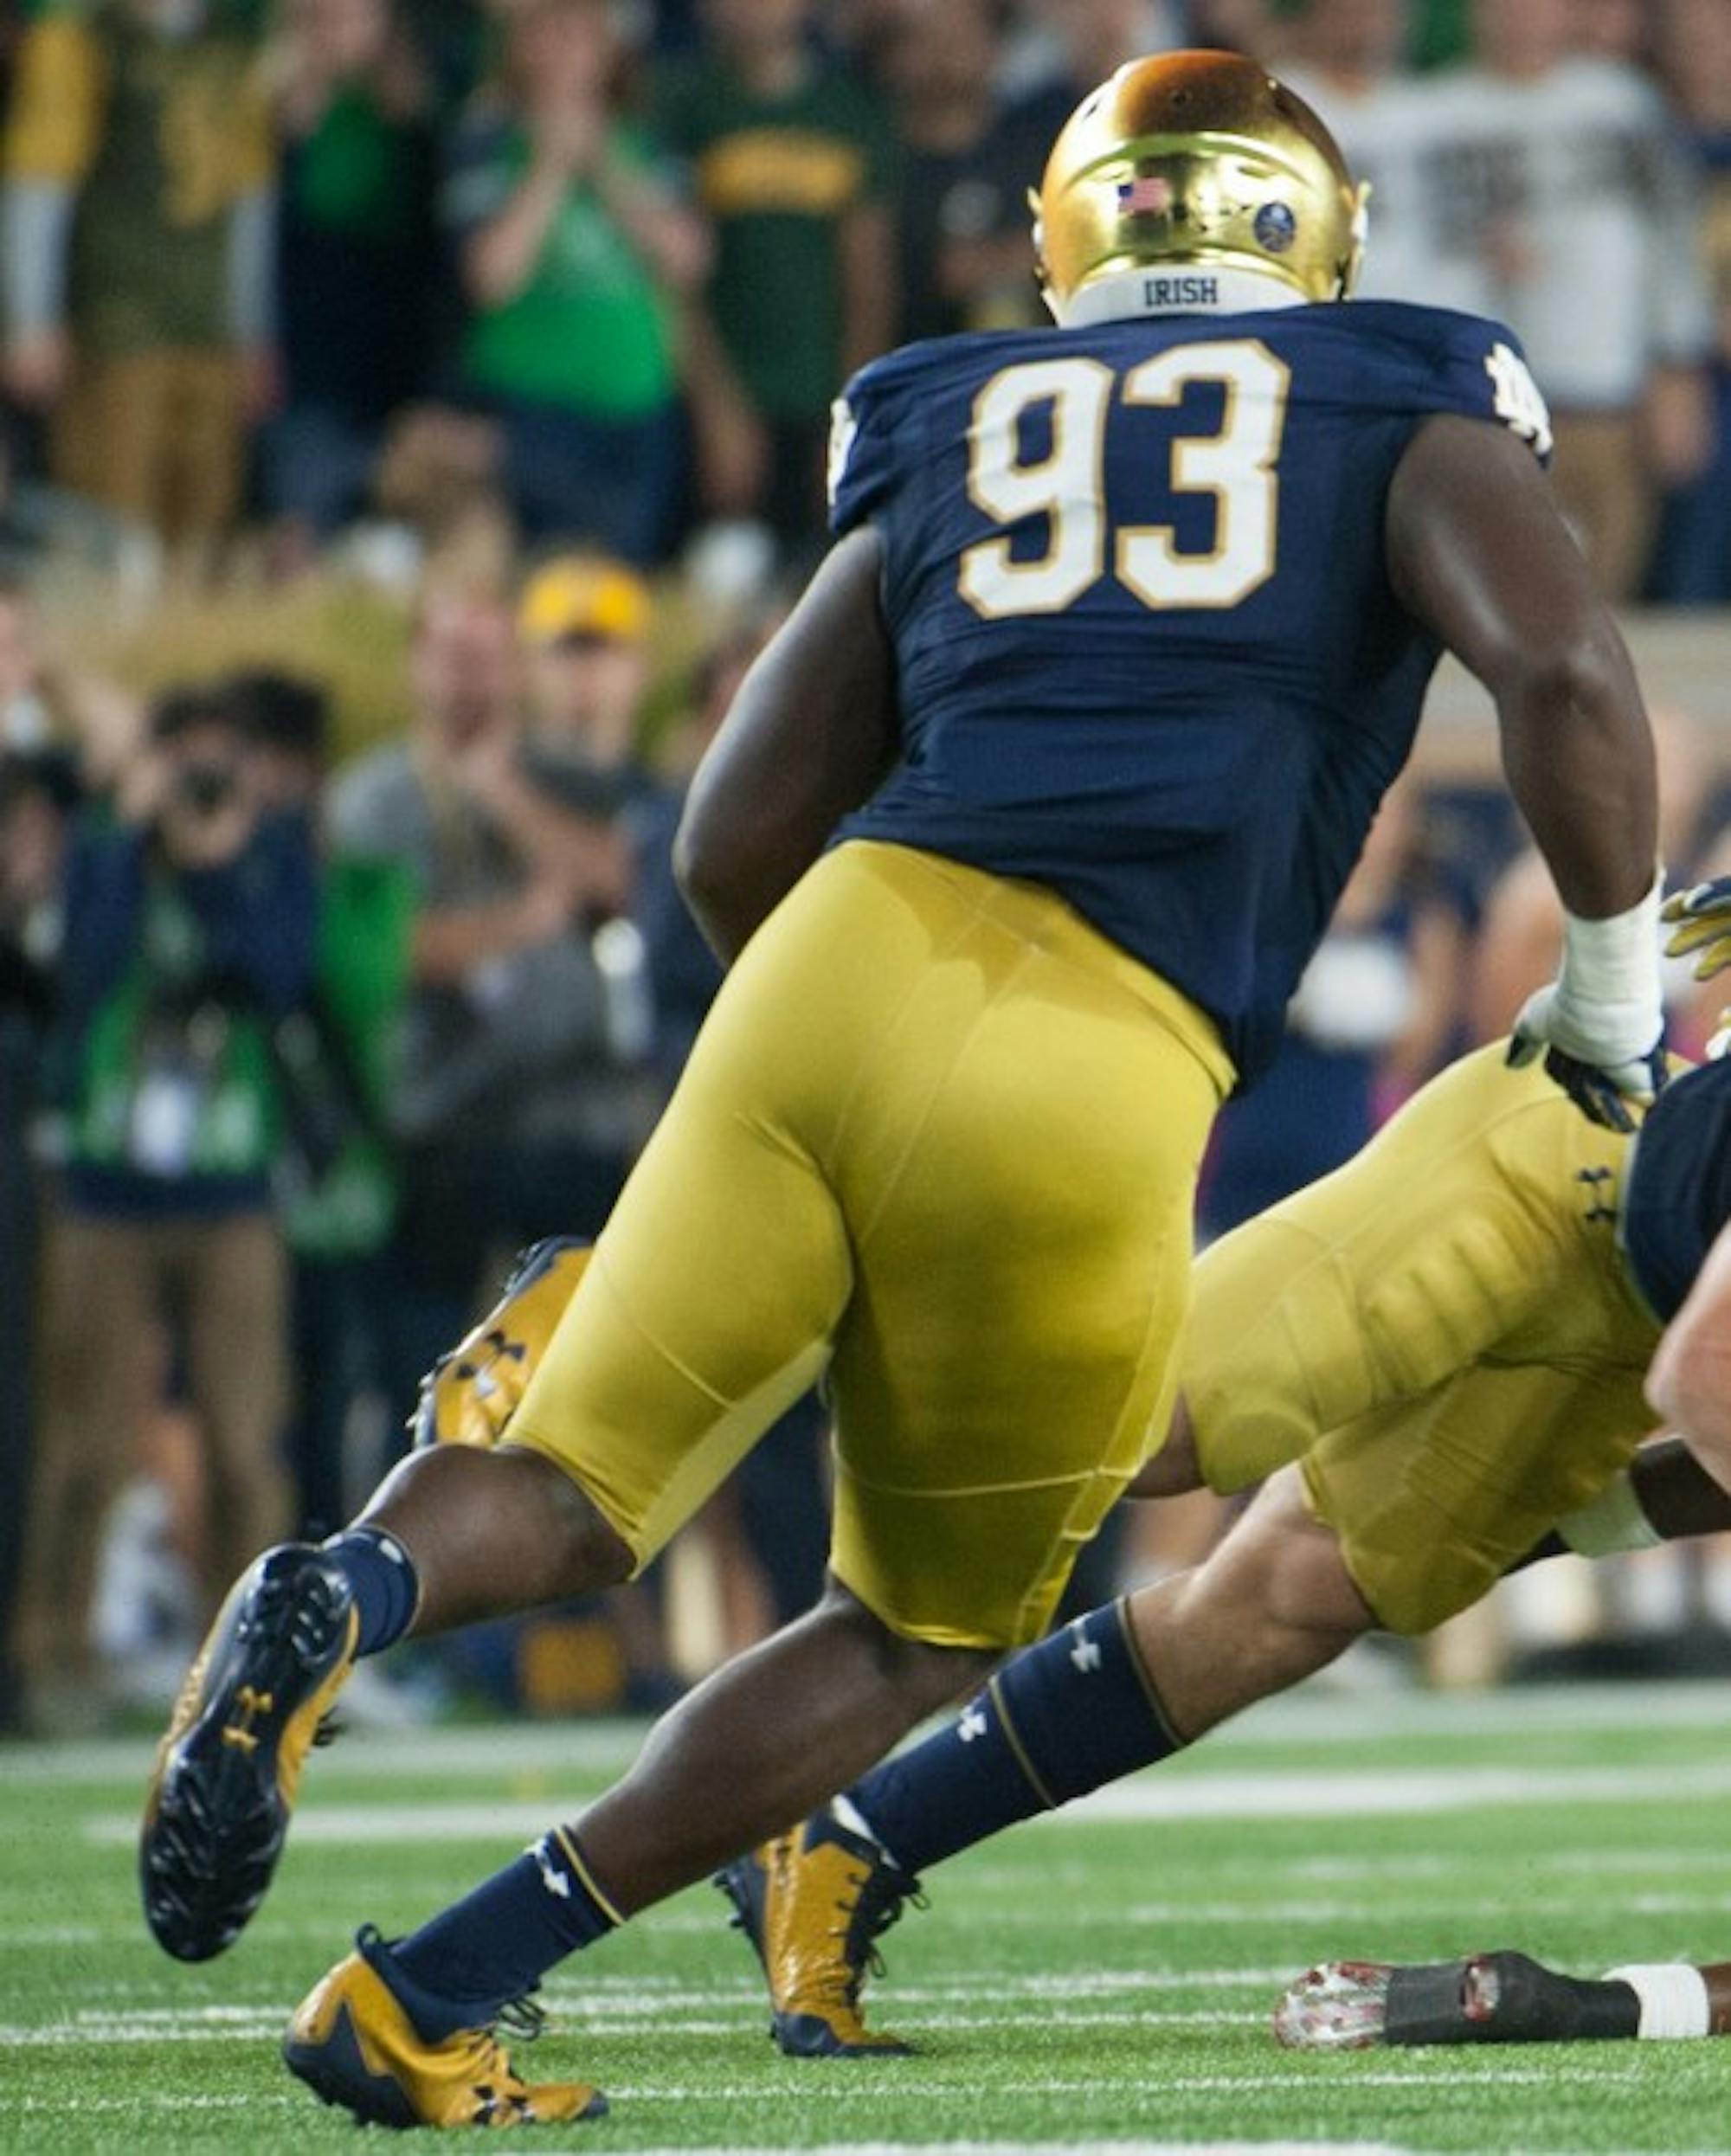 Jay Hayes rushes in to make a tackle against USC on Sat. at Notre Dame Stadium.